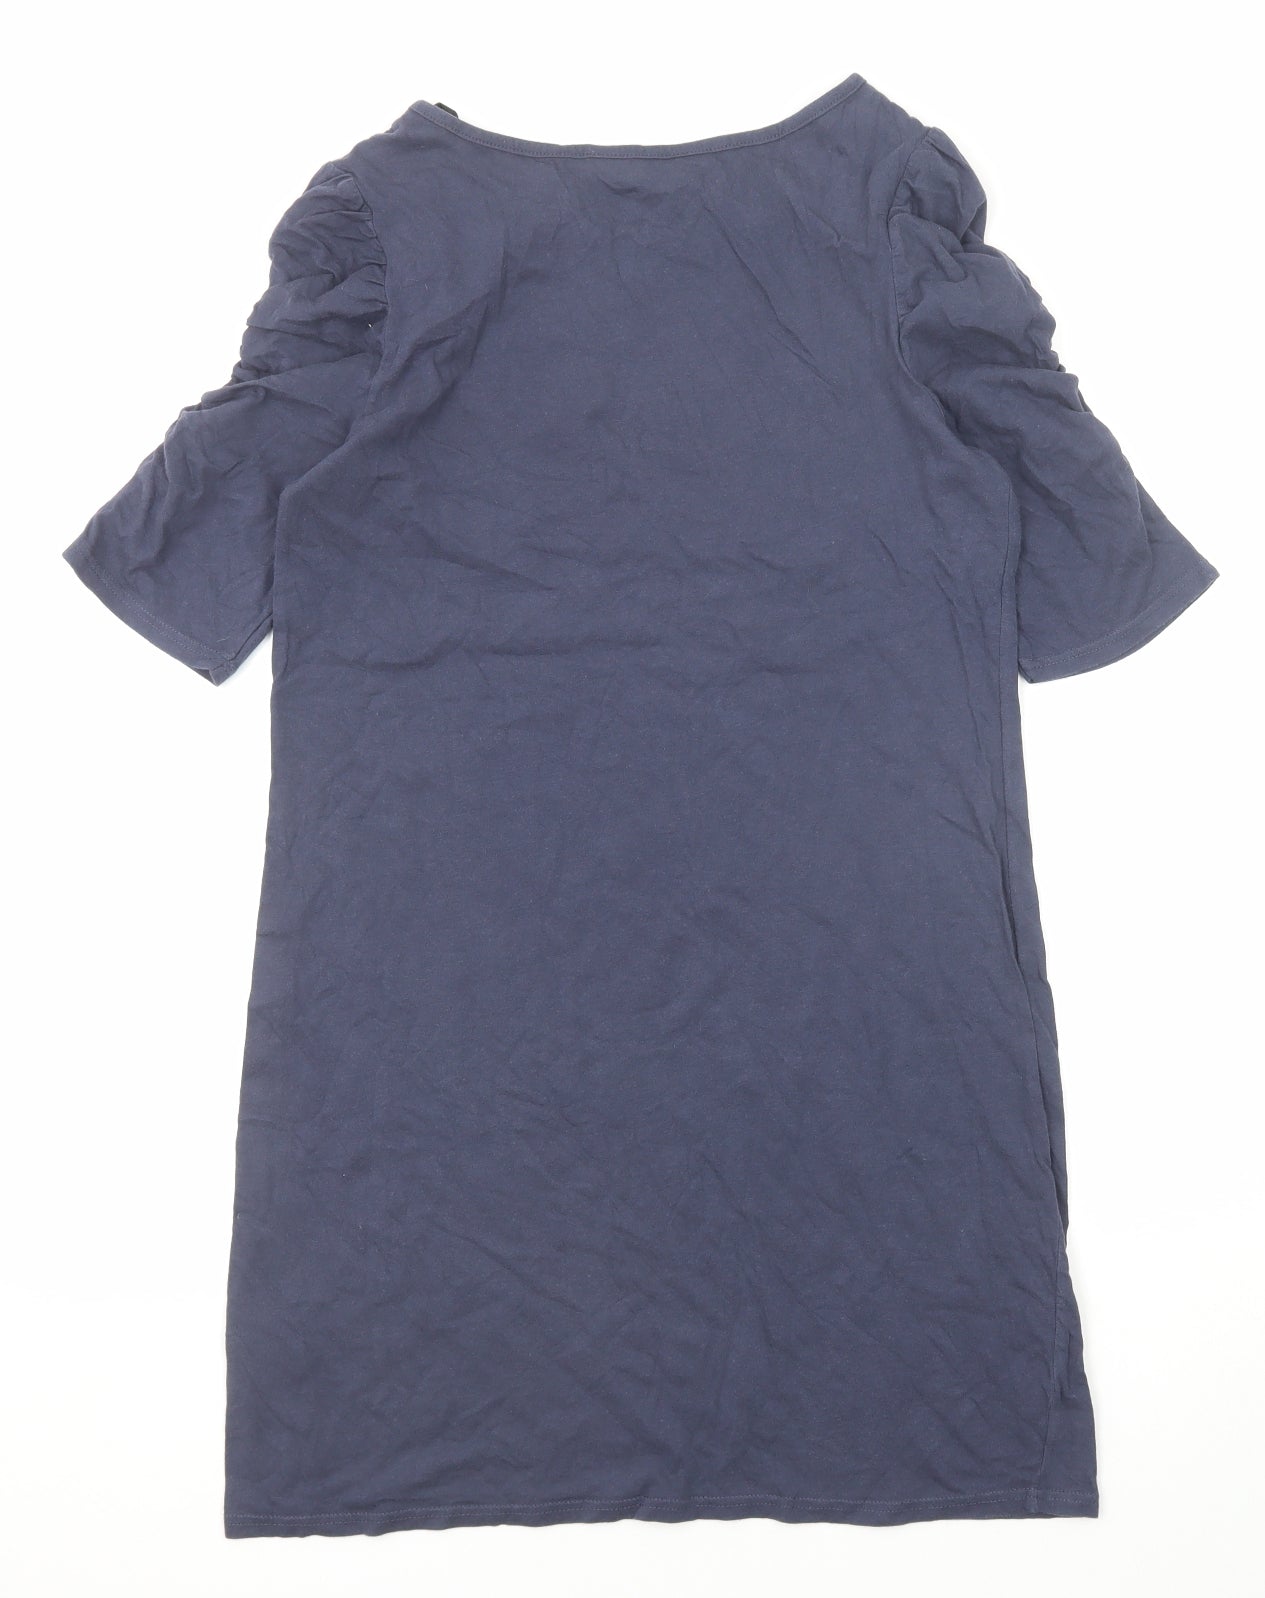 Dorothy Perkins Womens Blue Cotton Basic T-Shirt Size 12 Boat Neck - Ruched Sleeves